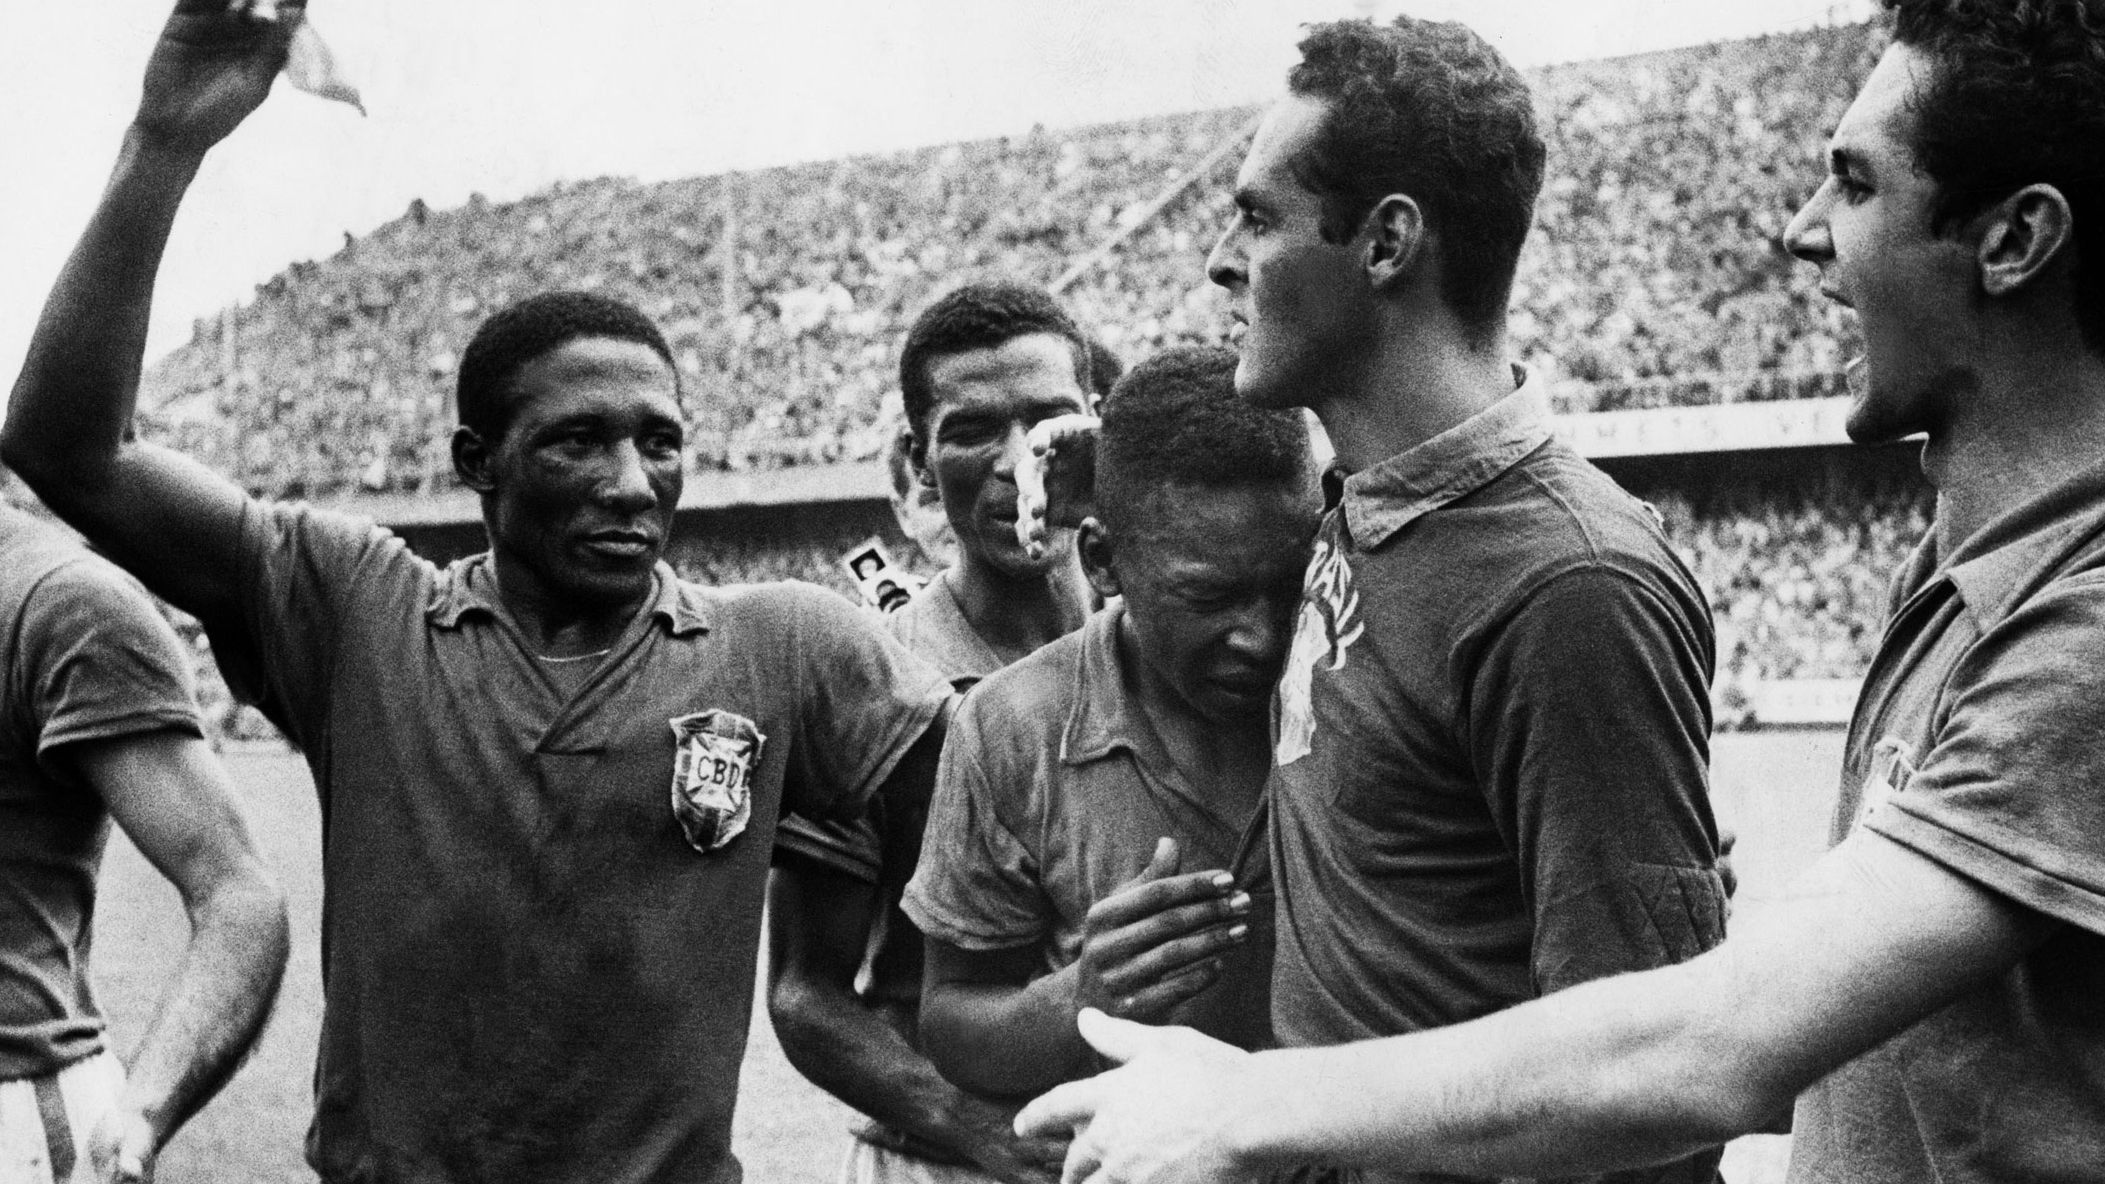 Pelé cries on Brazilian teammate Gilmar after winning the World Cup in 1958. In addition to scoring twice in the final, Pelé scored a hat trick in the semifinal win against France. He also scored the team's lone goal in the quarterfinal win over Wales.